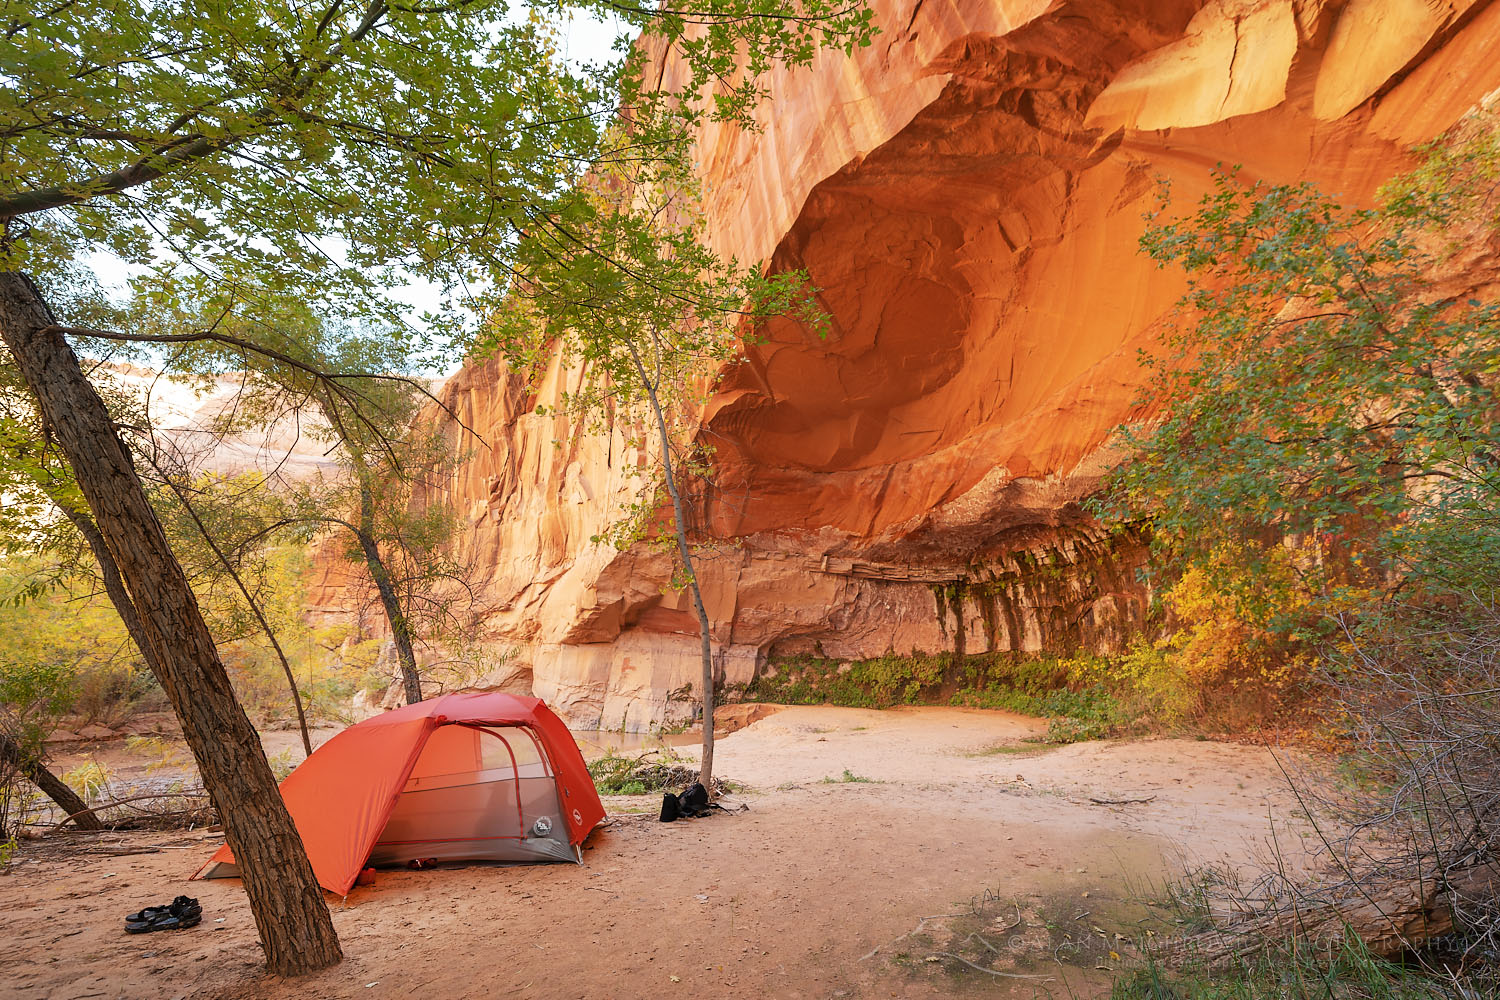 Backcountry camp with red tent in Coyote Gulch, Glen Canyon National Recreation Area Utah